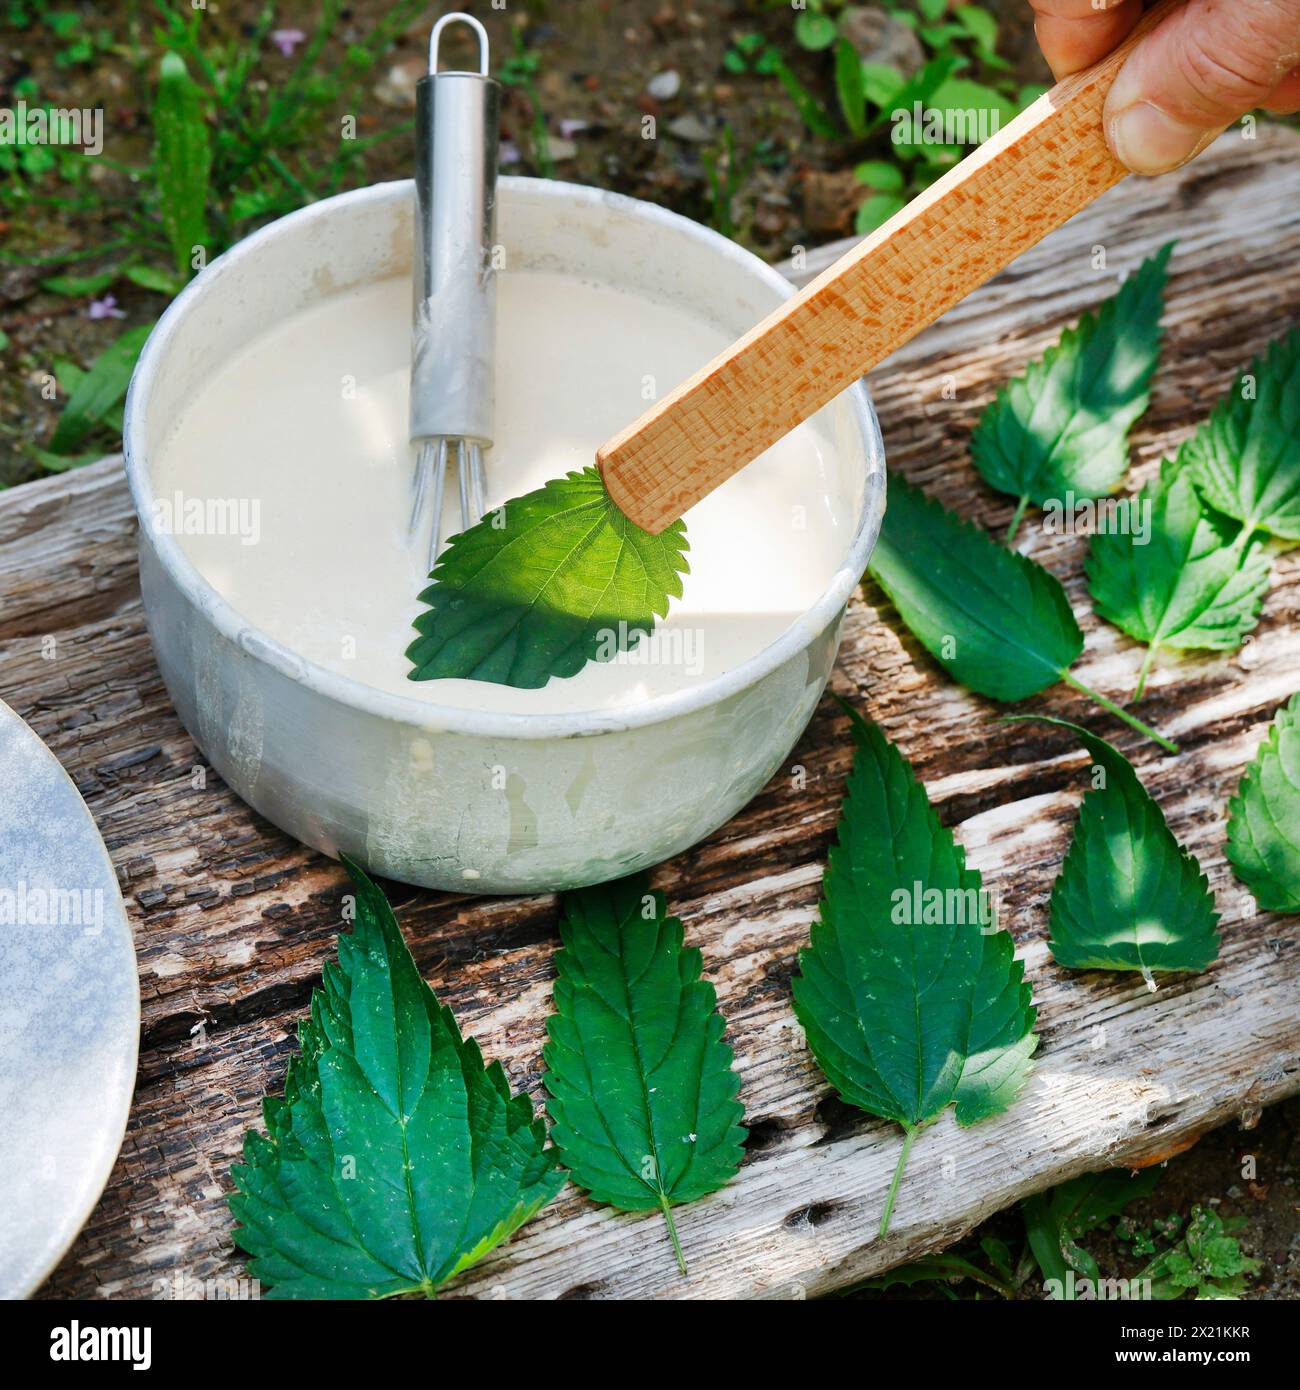 Making vegan plant-based potato chips with nettle leaves, step 3: Nettle leaves are dipped into the batter, series image 3/5 Stock Photo